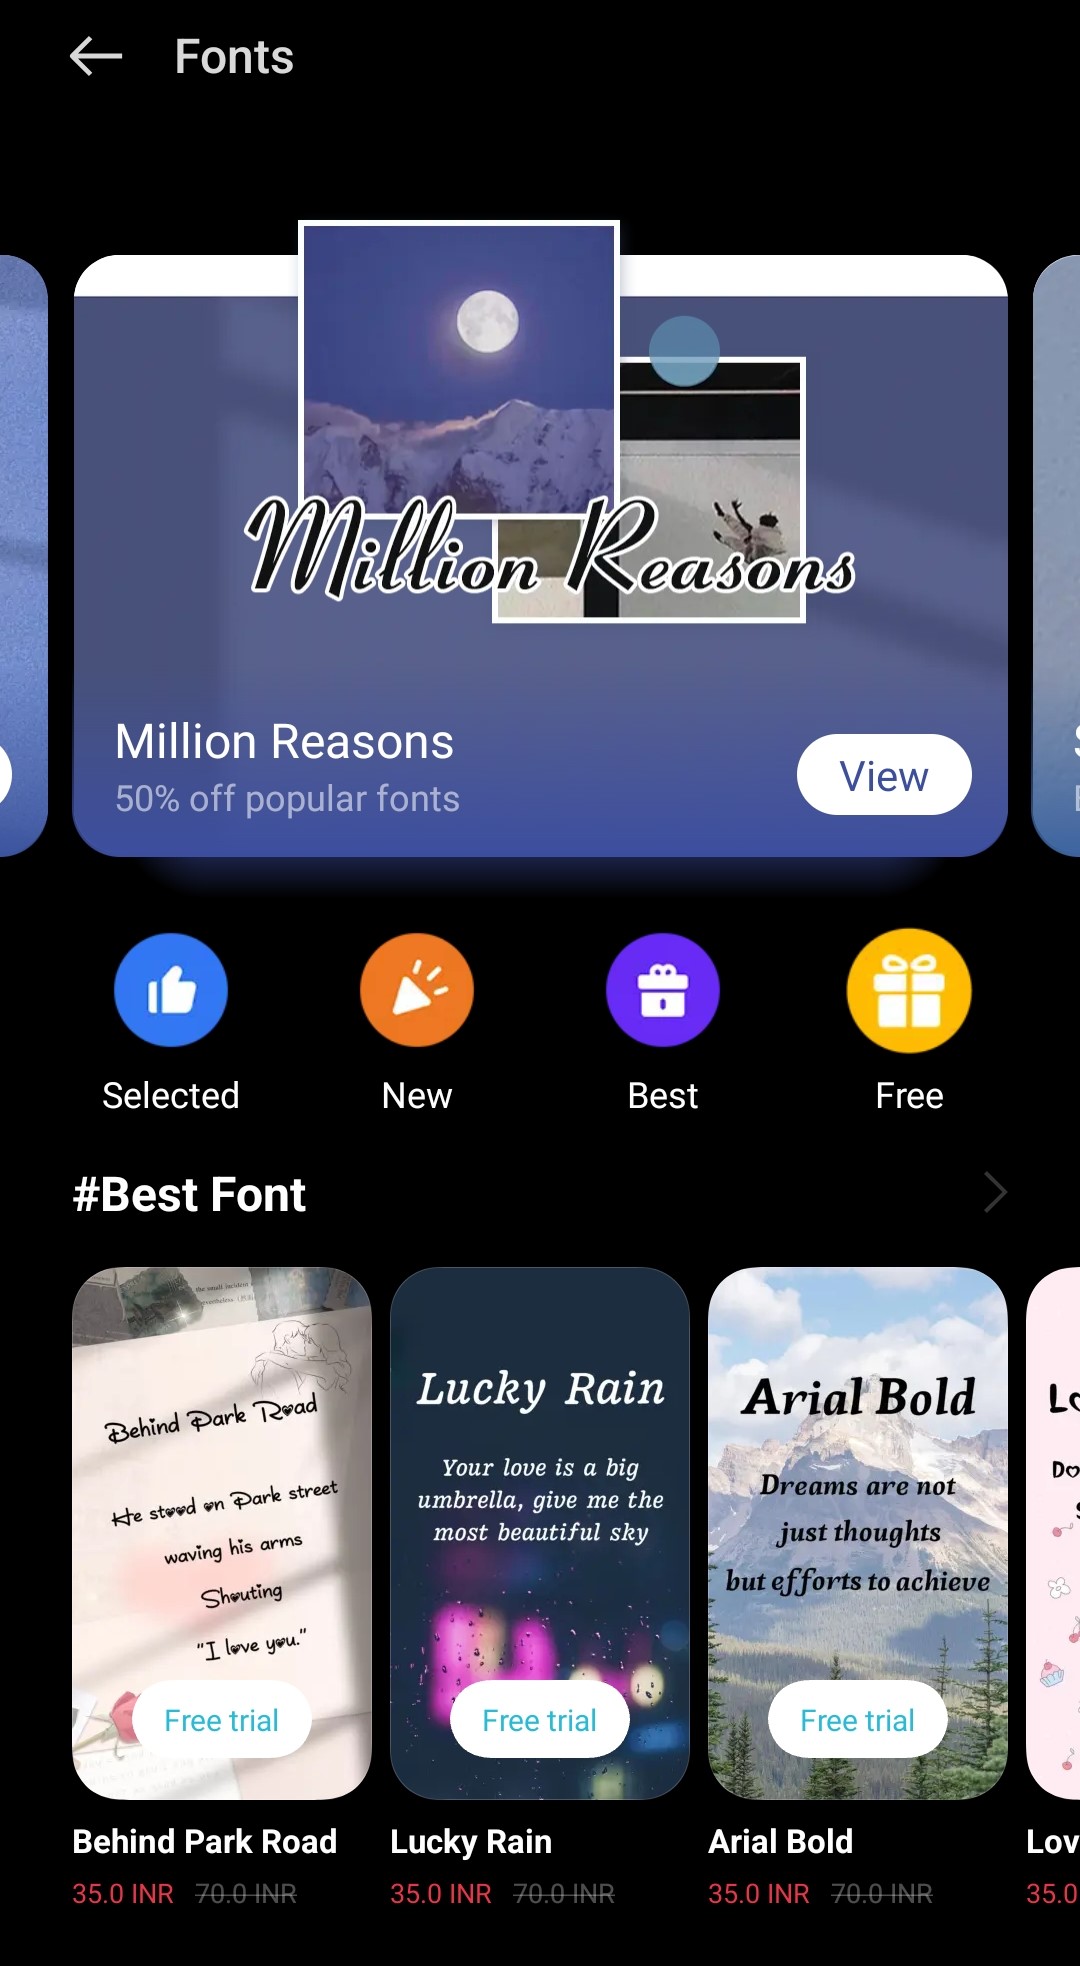 More fonts on OnePlus